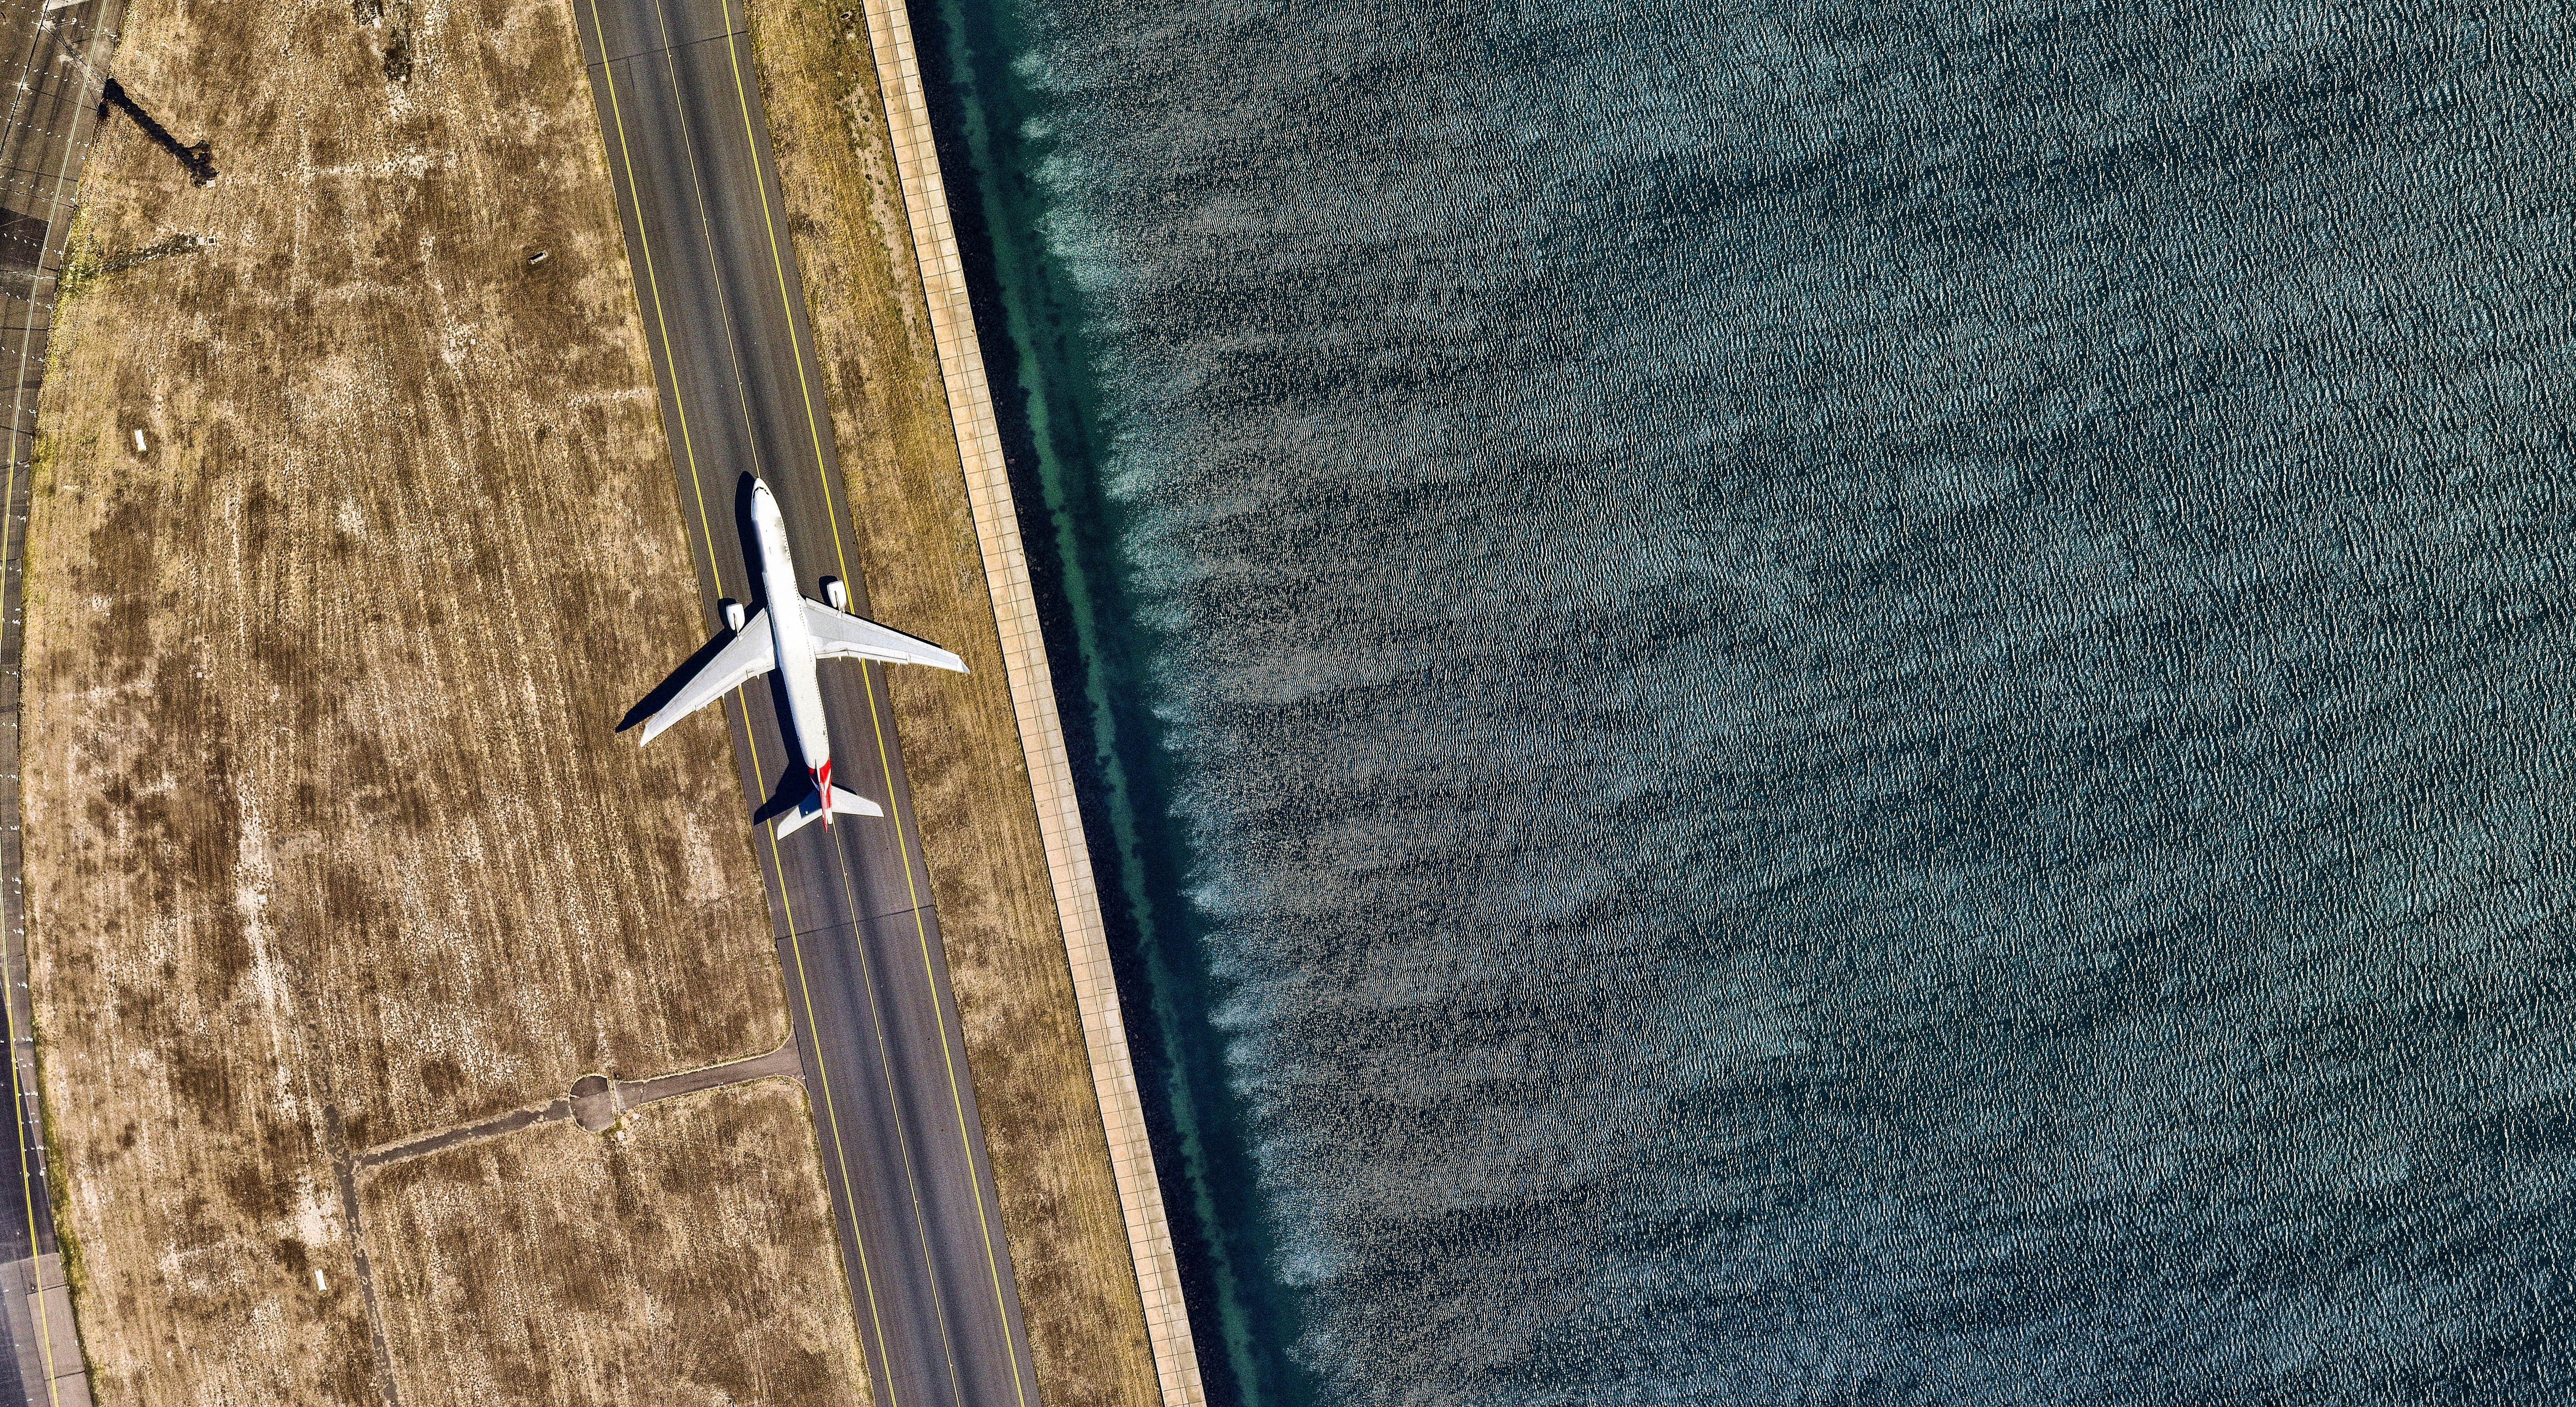 An airplane on tarmac from above